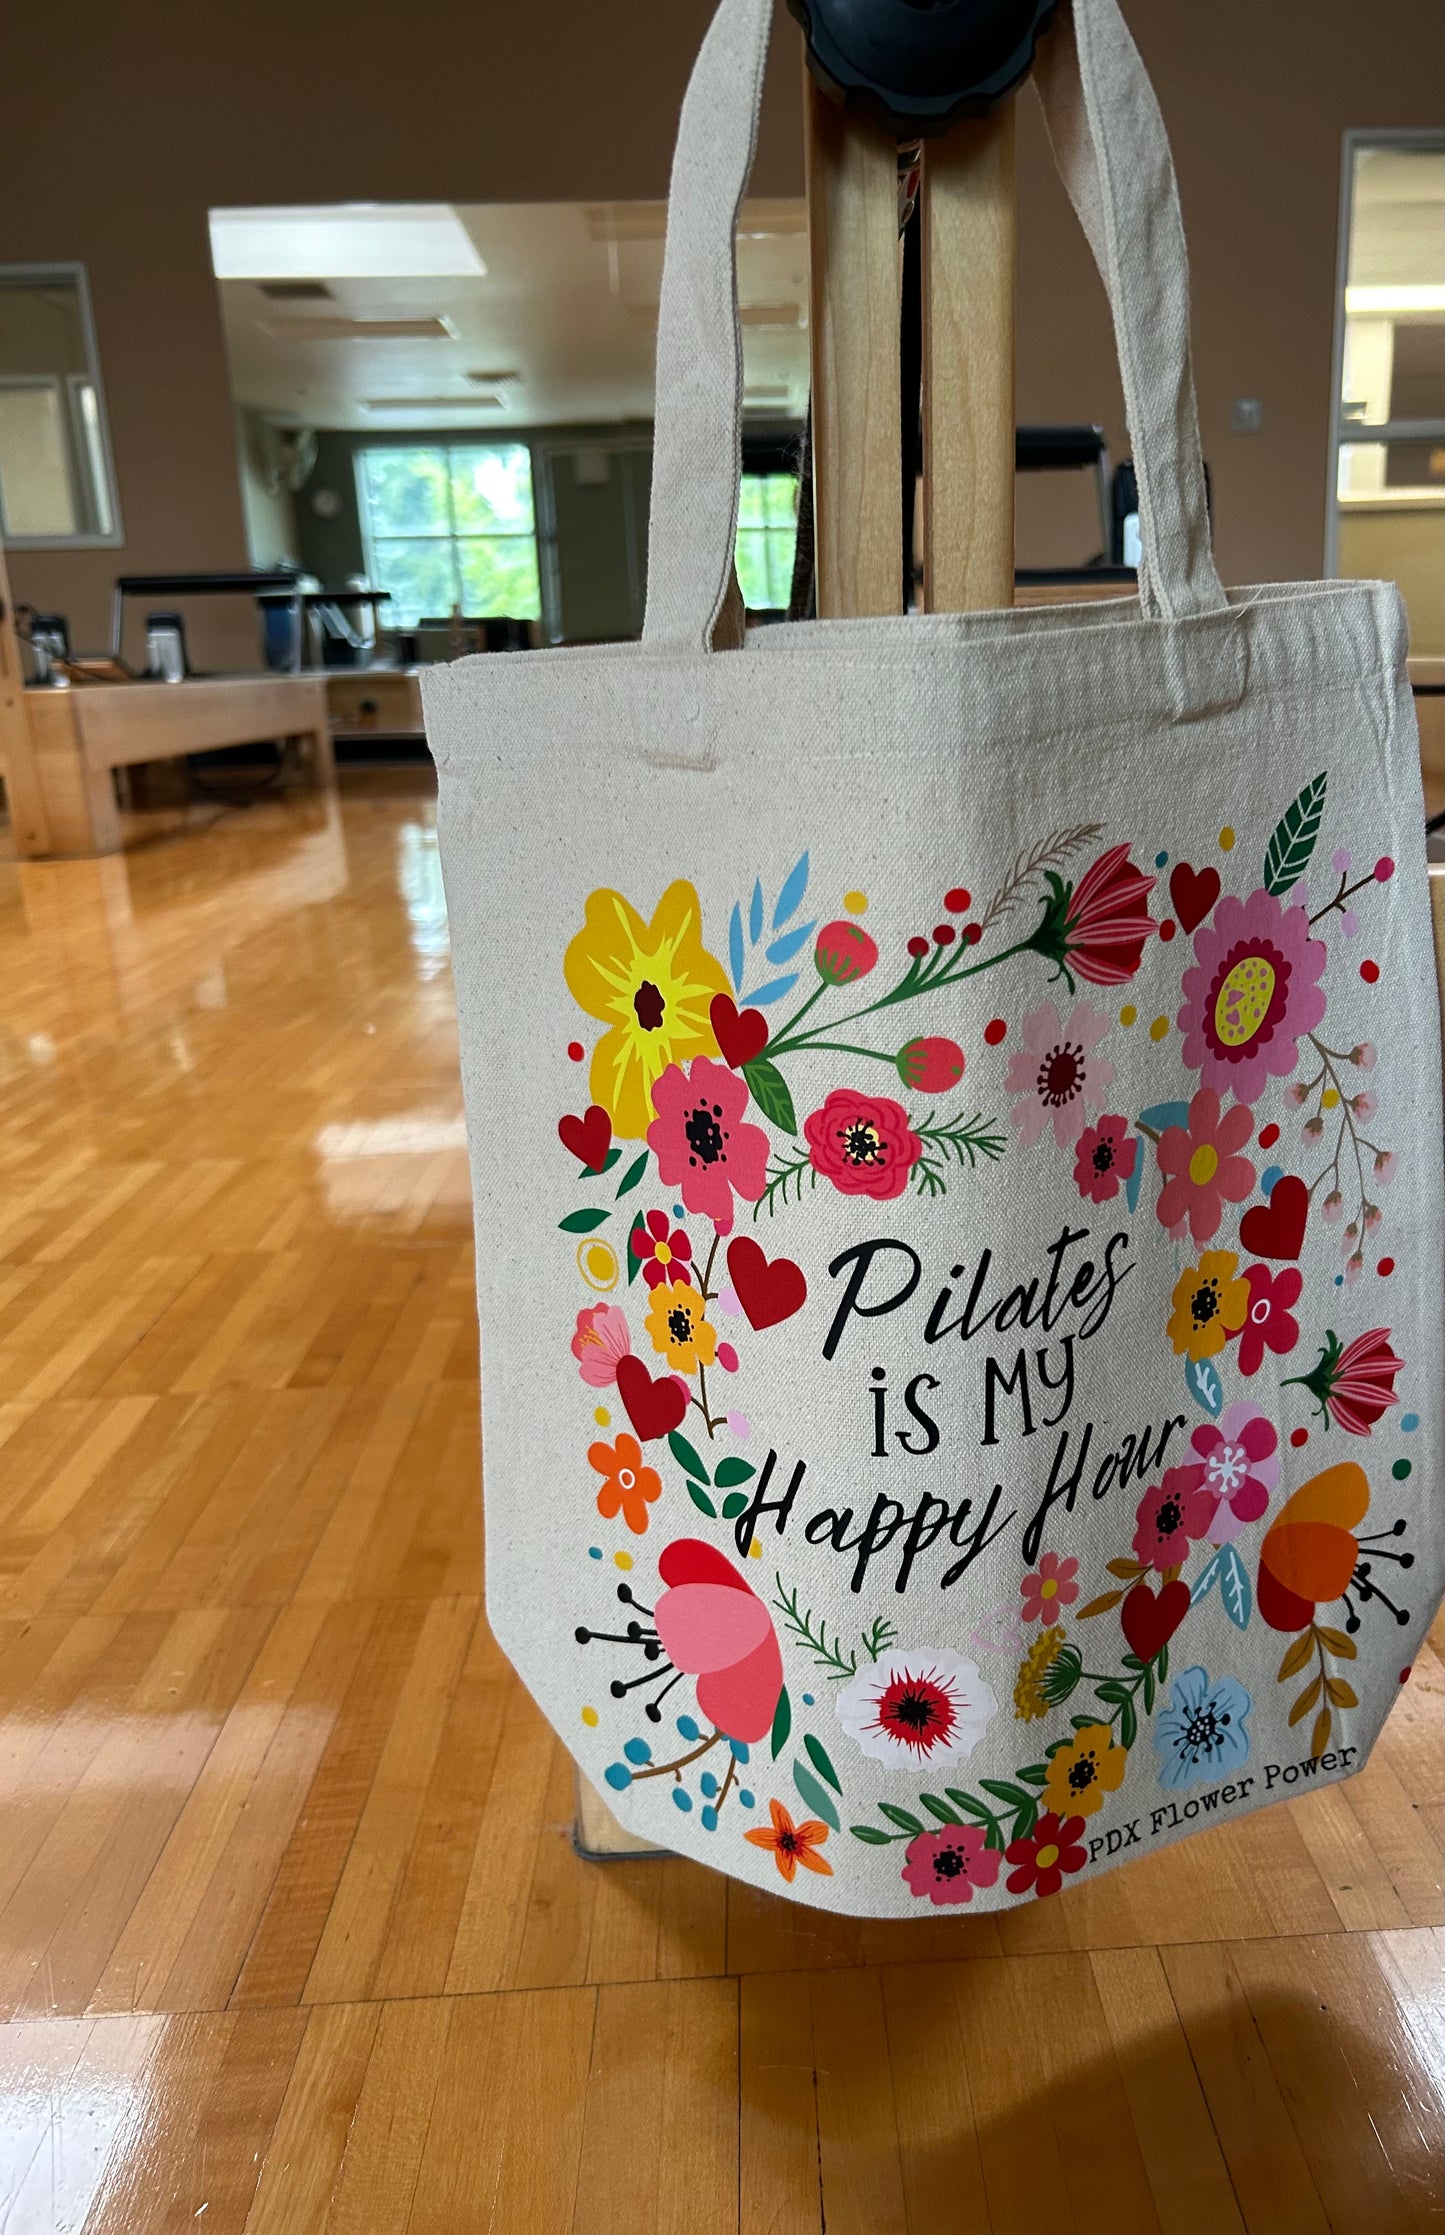 Pilates is my Happy hour small canvas tote, Bright and cheery Pilates gifts, Fun Pilates swag